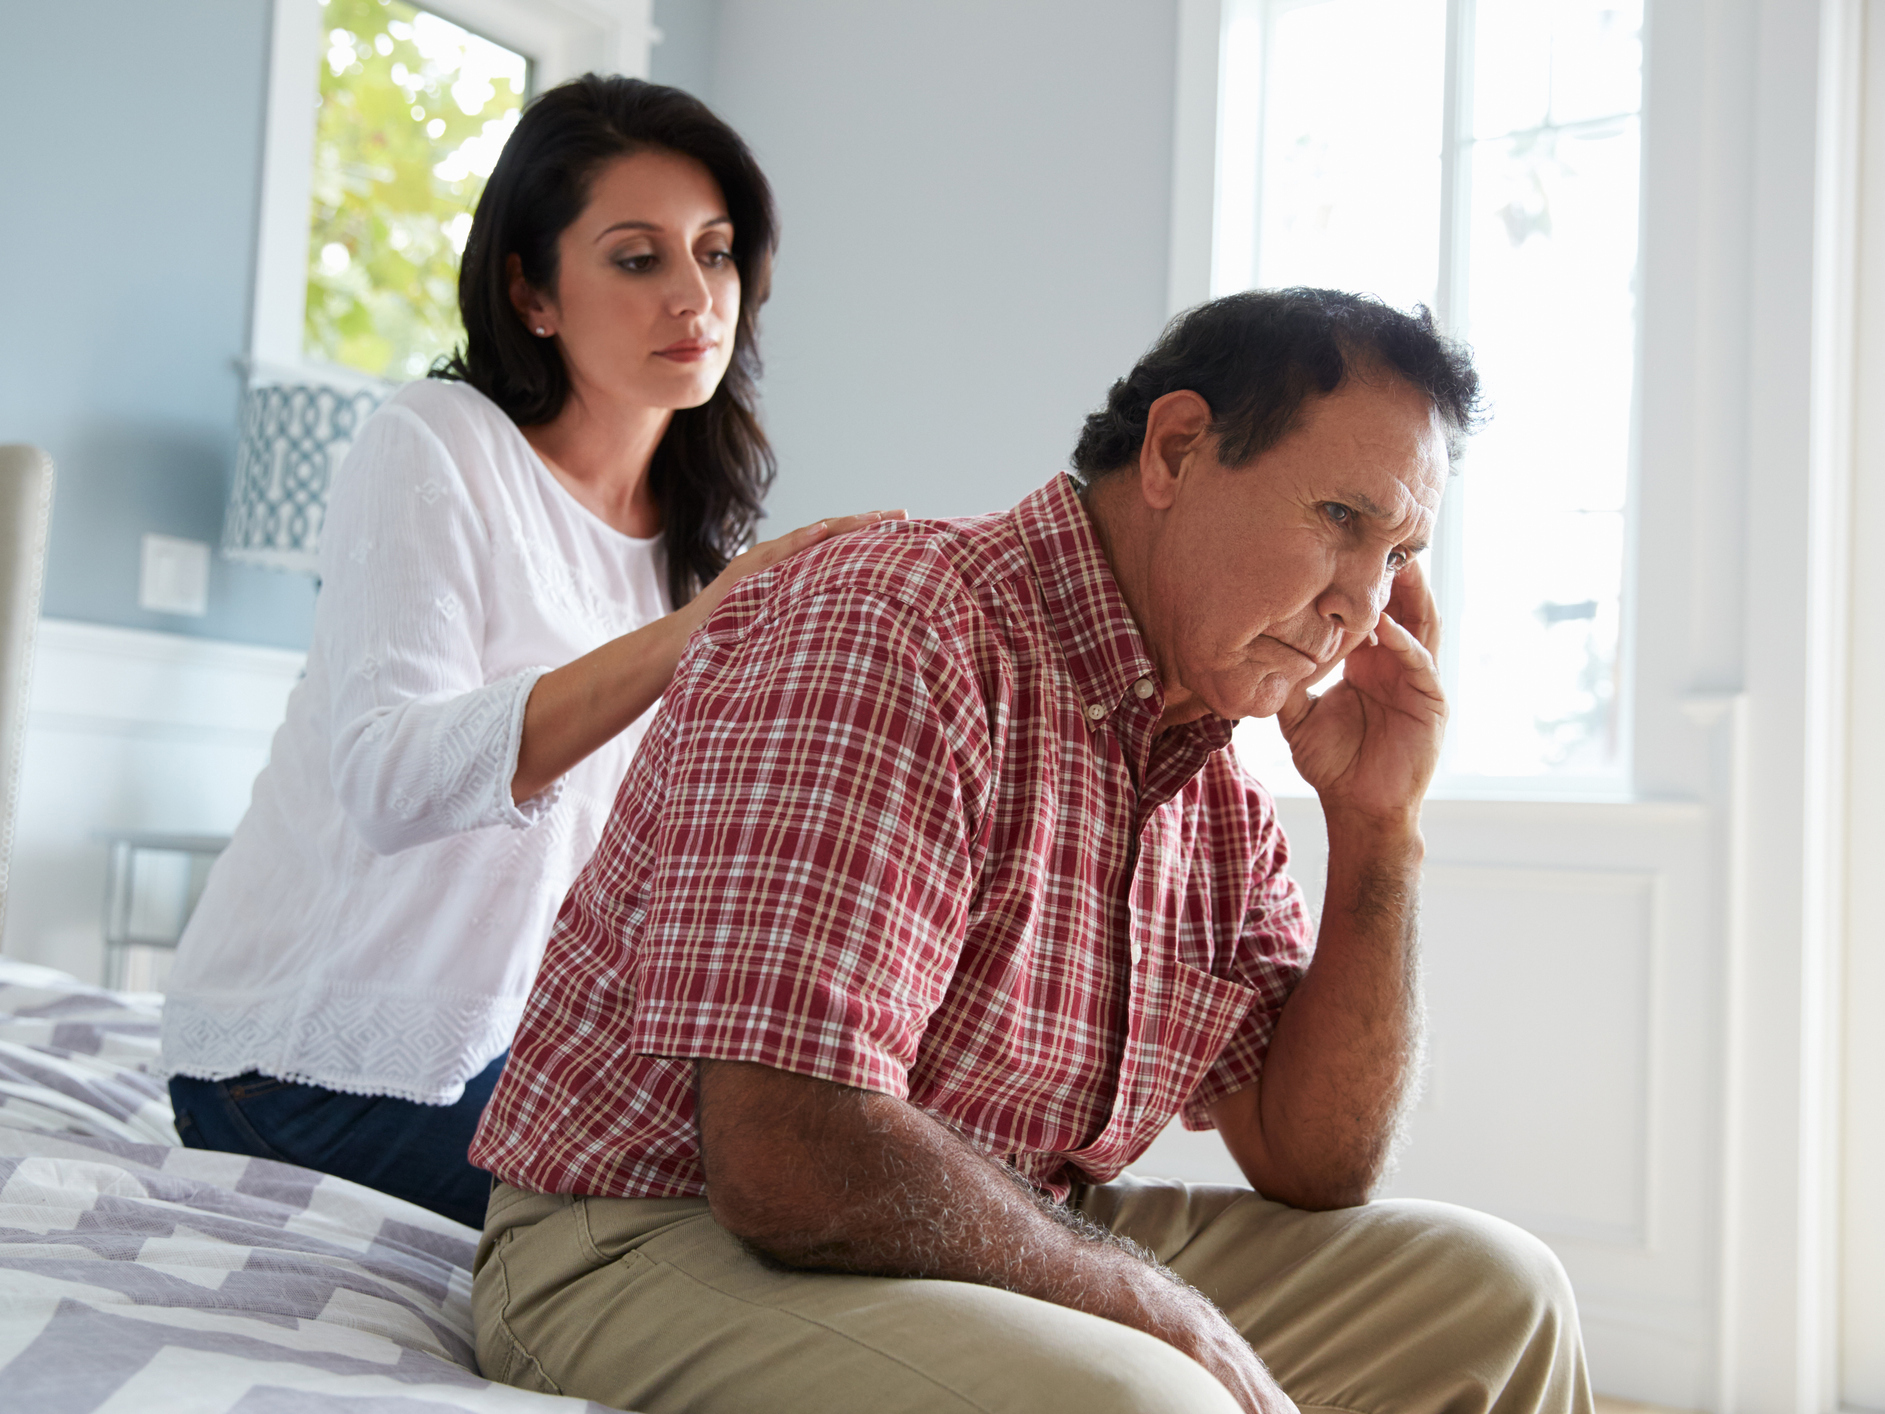 Is taking care of a loved one damaging your health?